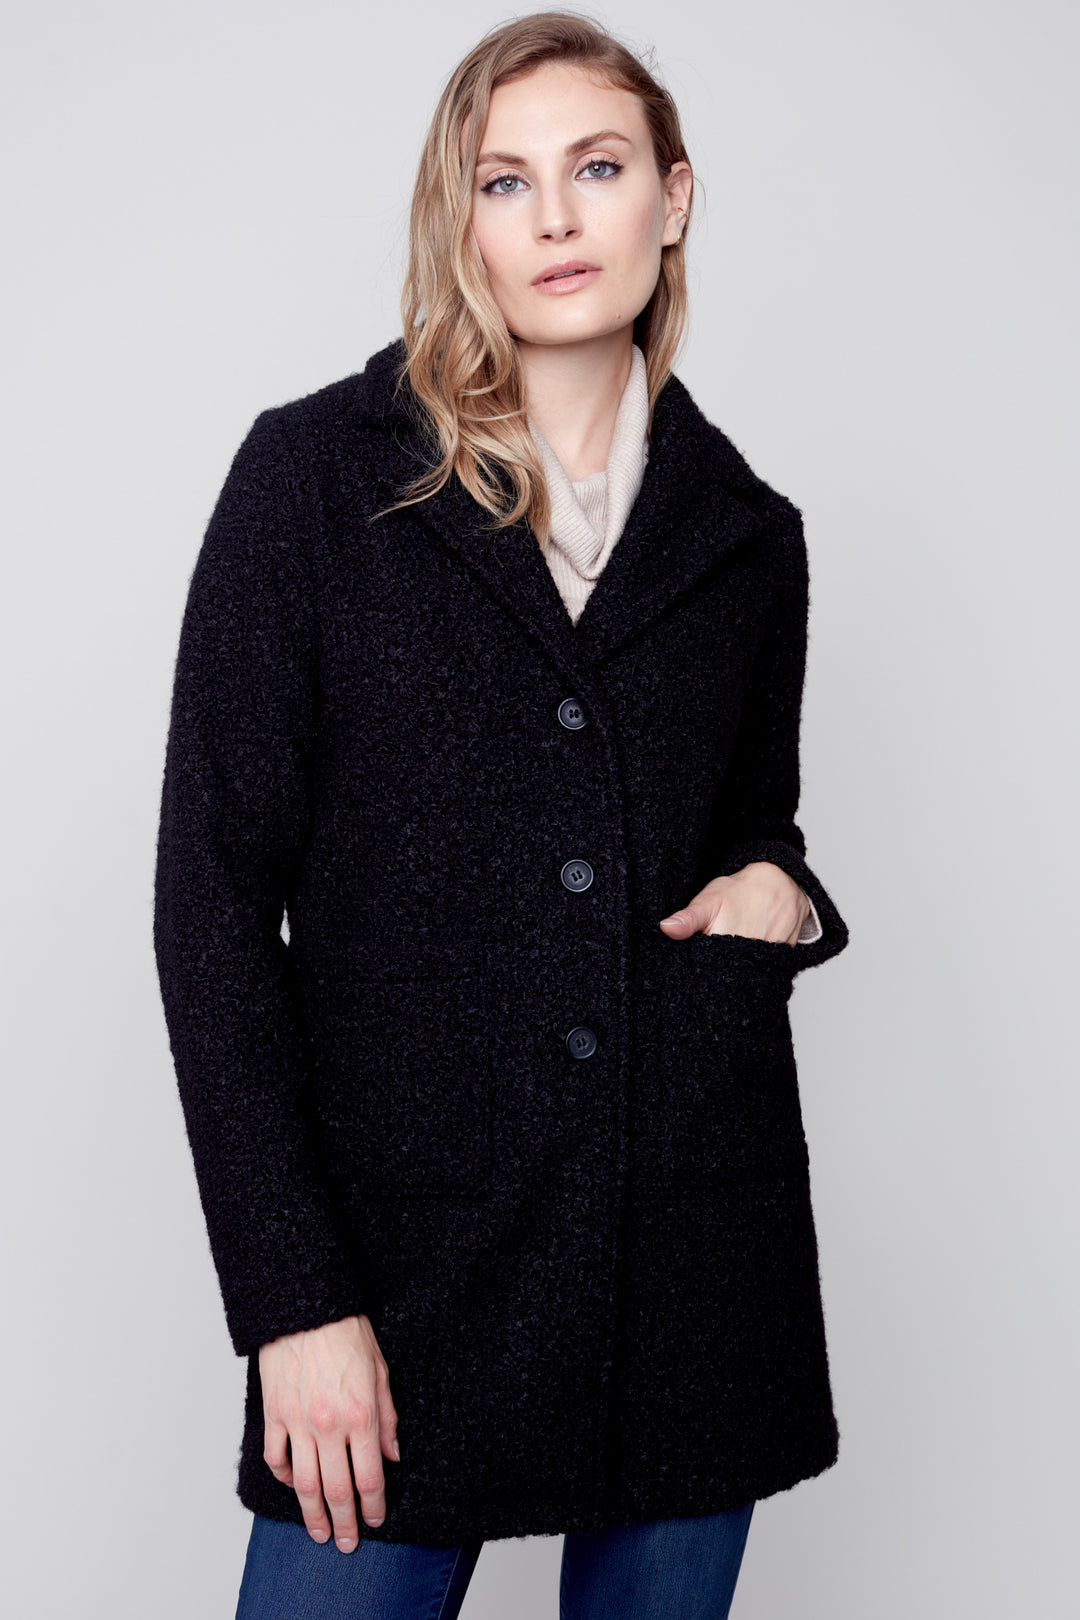 a luxurious bouclé knit coat tailored to provide a comfy and elegant look. This show-stopping piece has a tailored collar and two patch pockets, making it the ultimate fashion staple. 